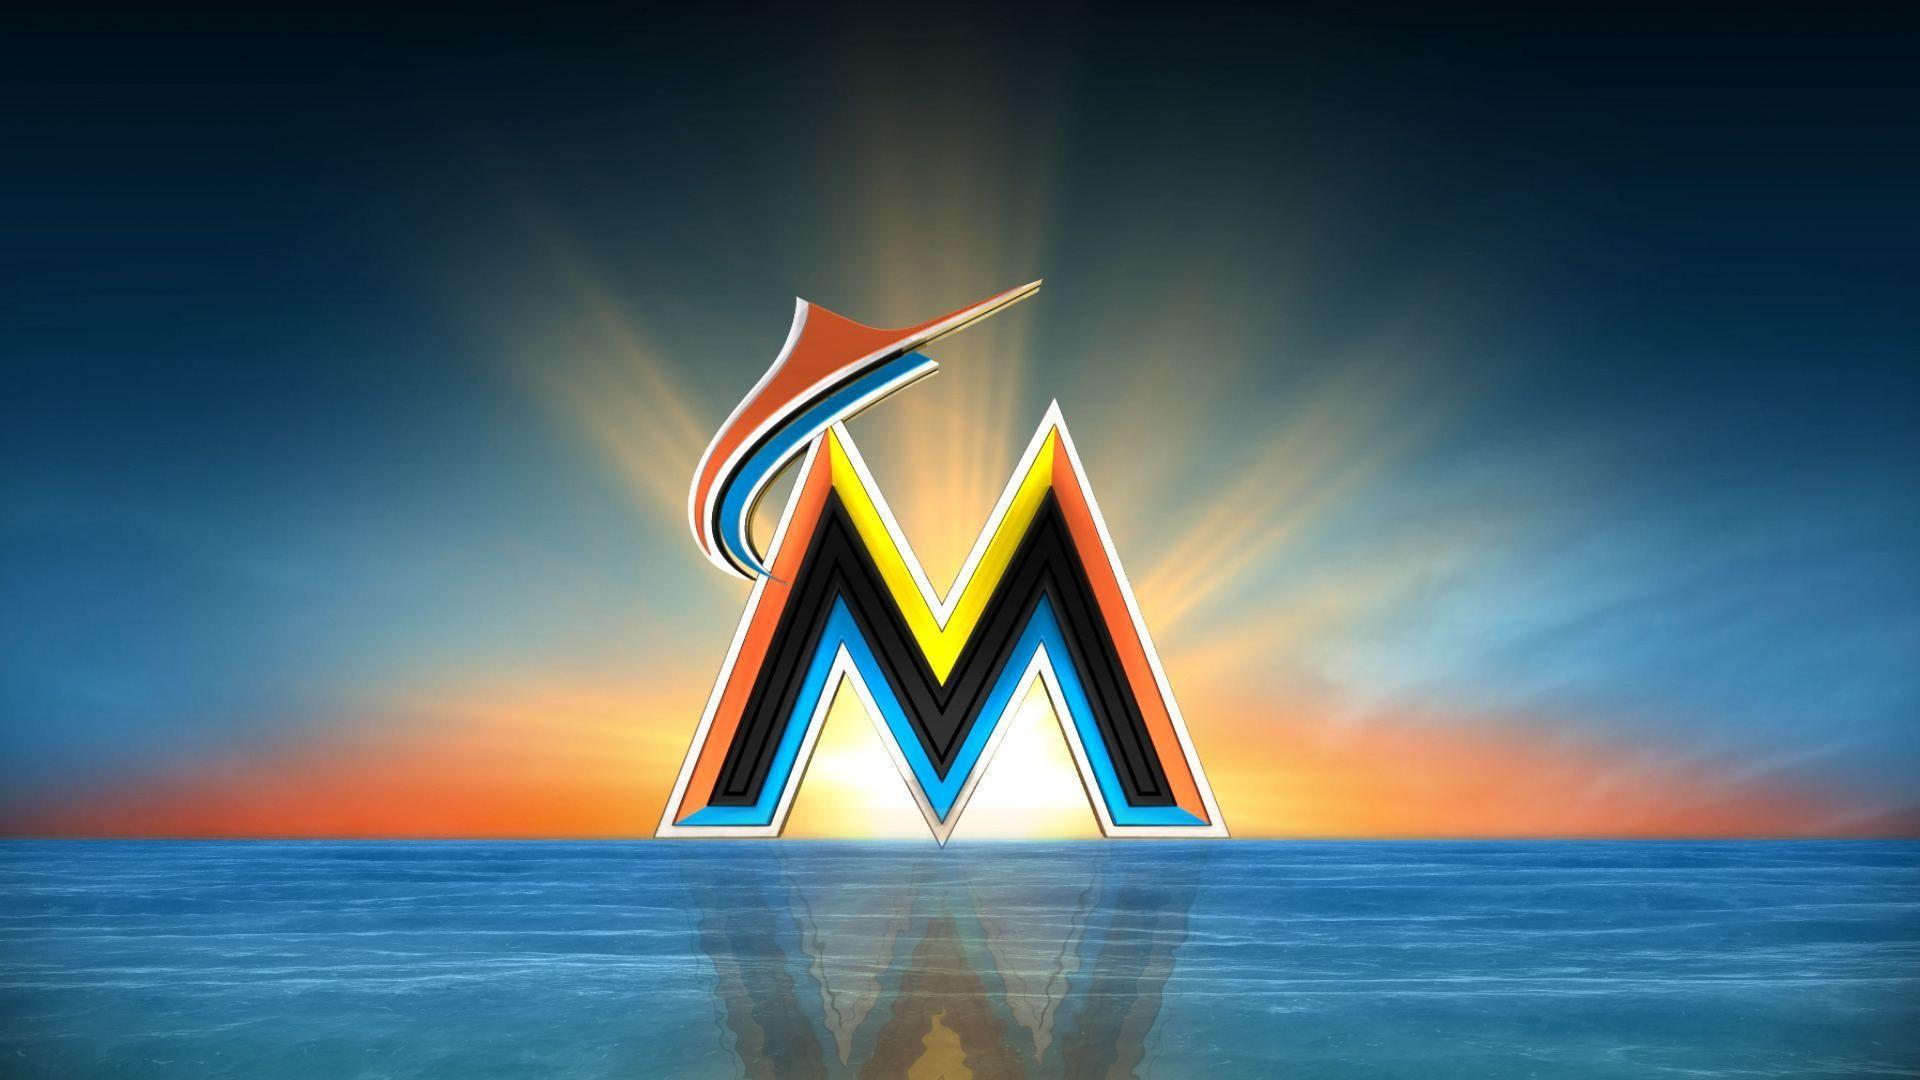 Miami Marlins Wallpaper Image Photo Picture Background